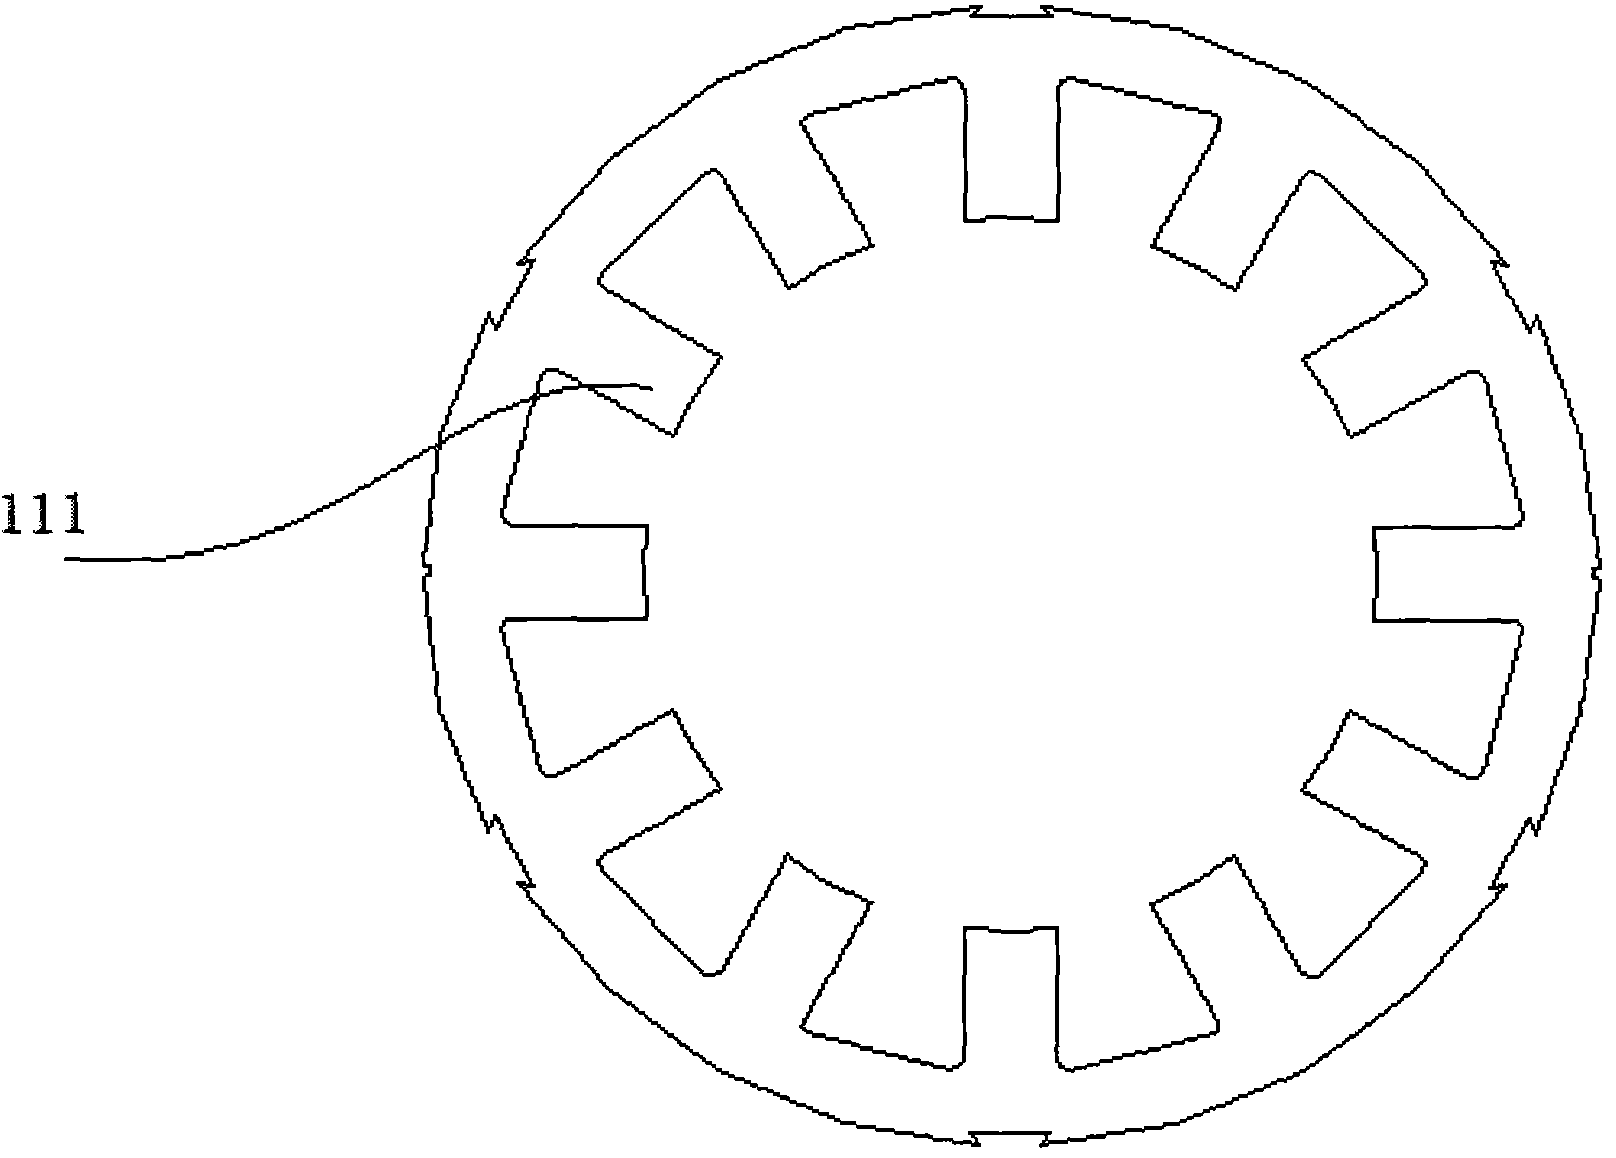 Switched reluctance motor for electric vehicle